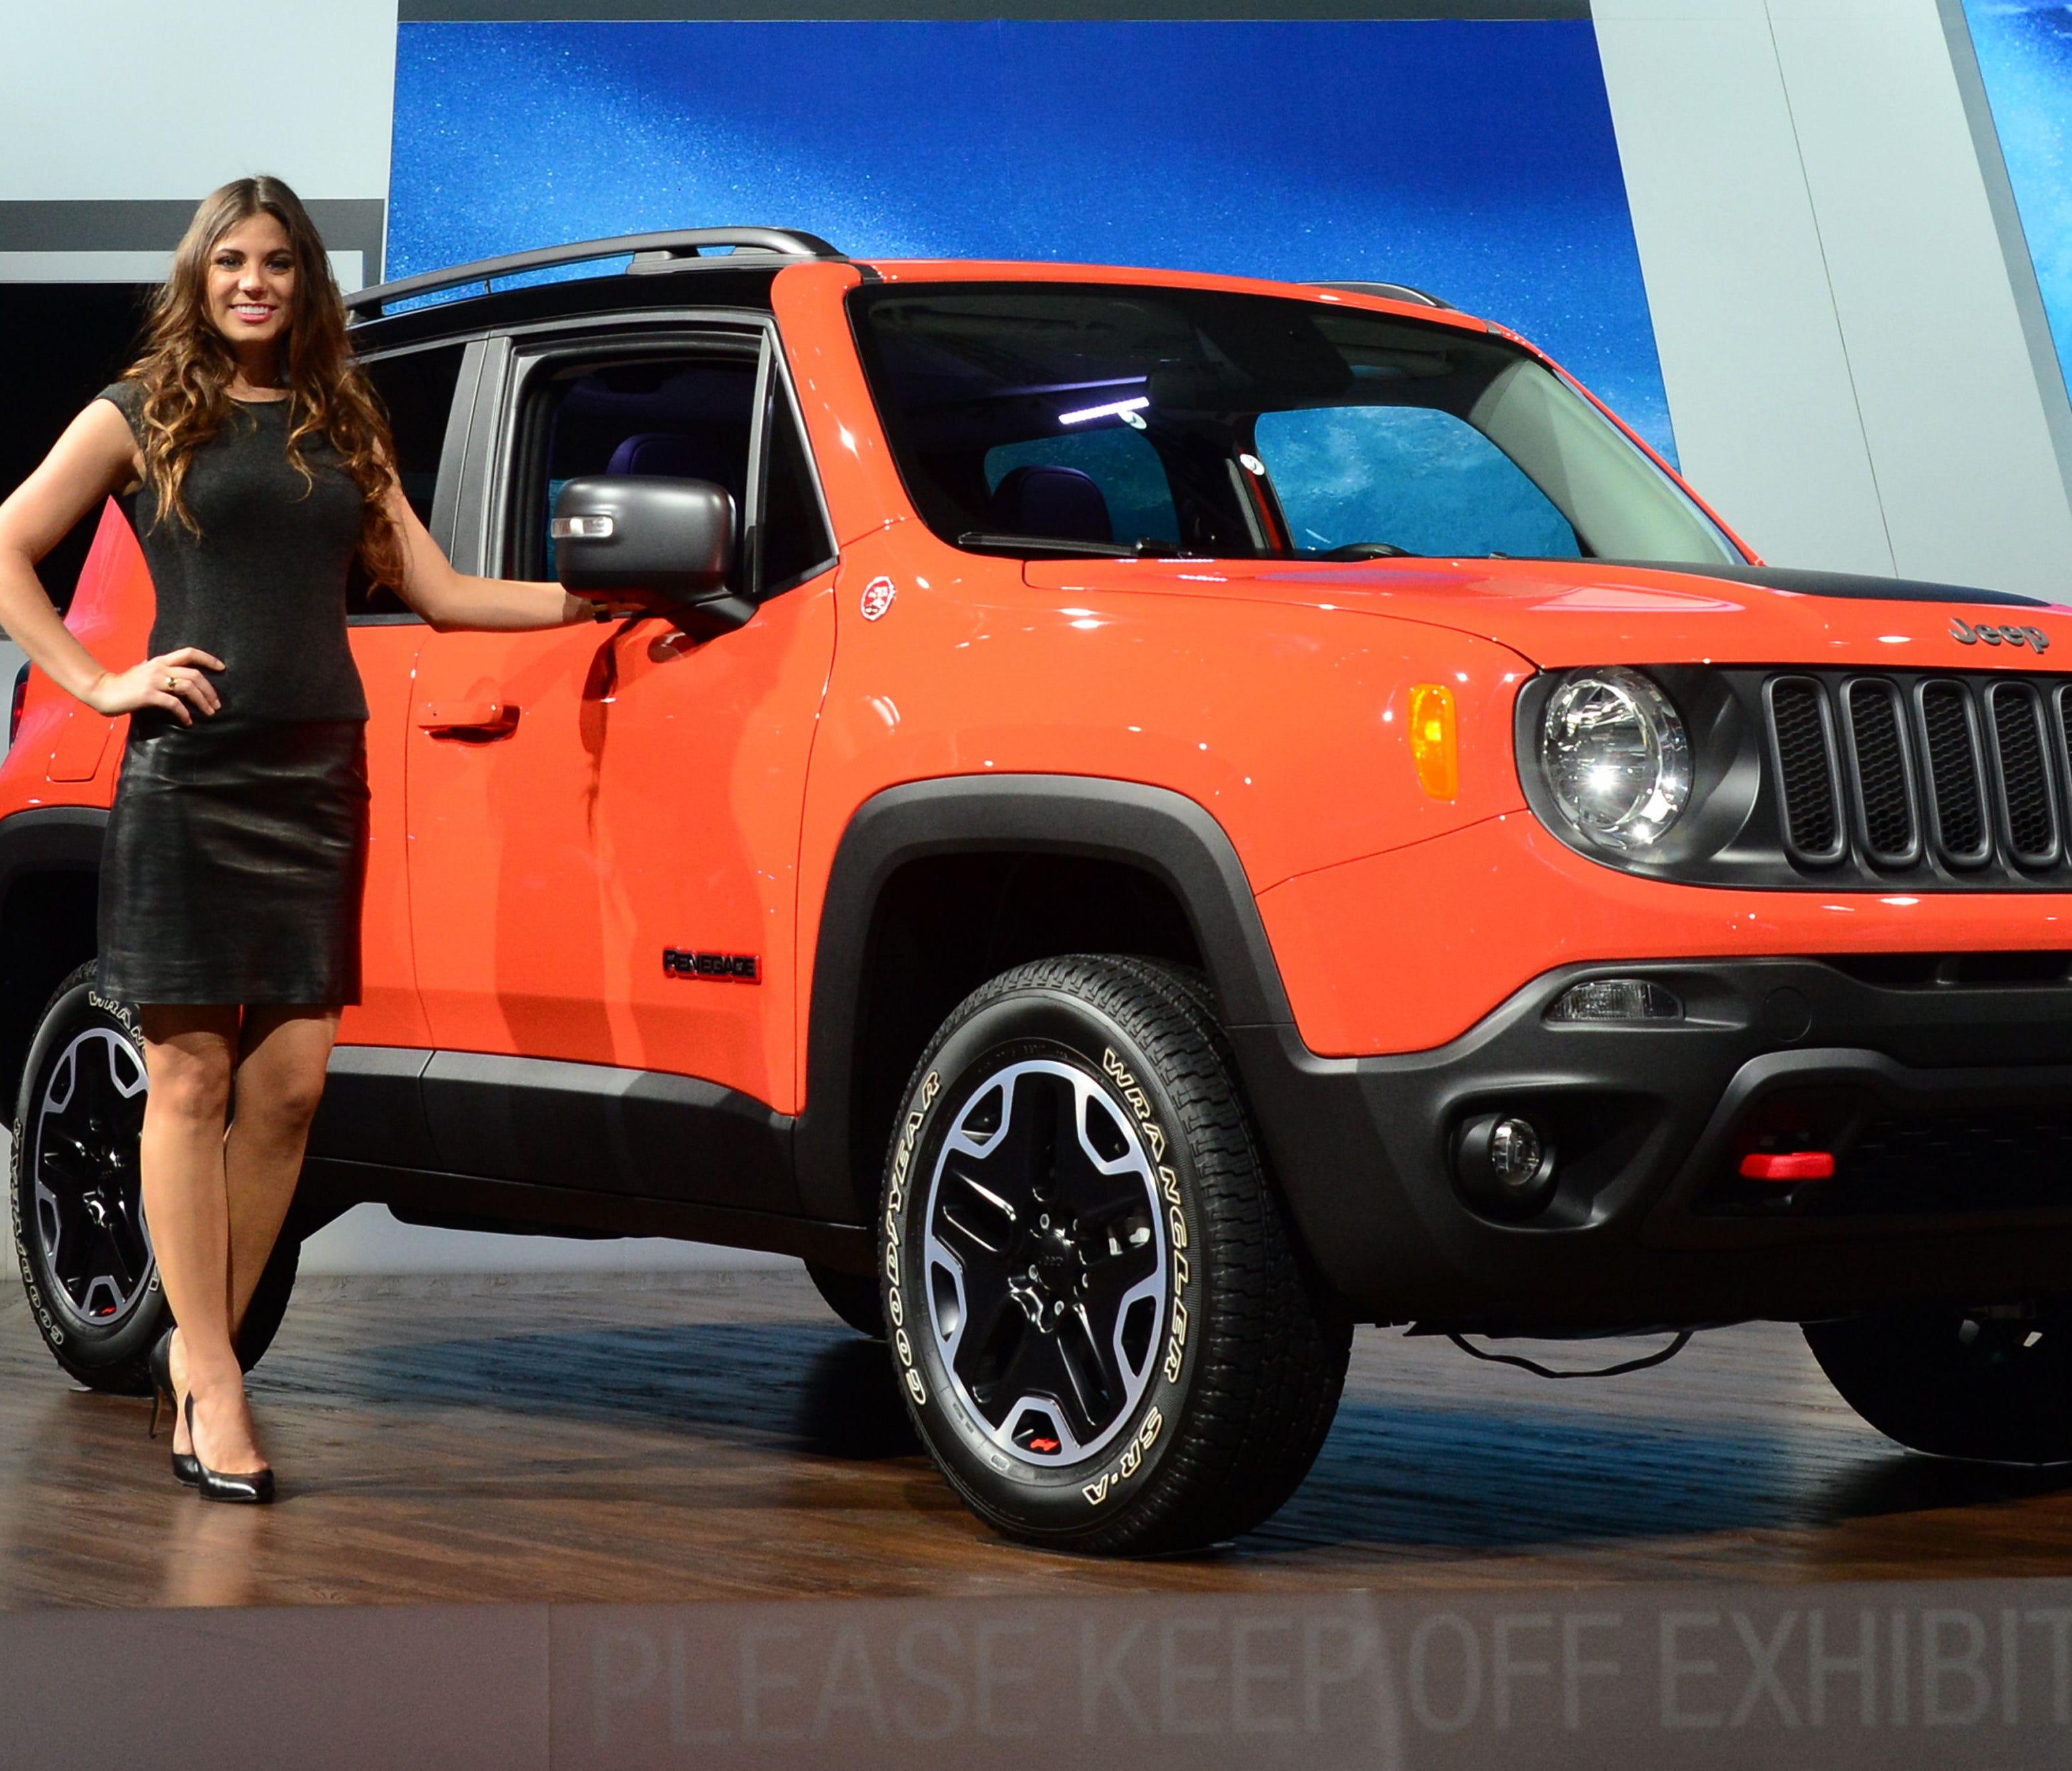 A model poses beside the Jeep Renegade on display at the Los Angeles Auto Show in 2014